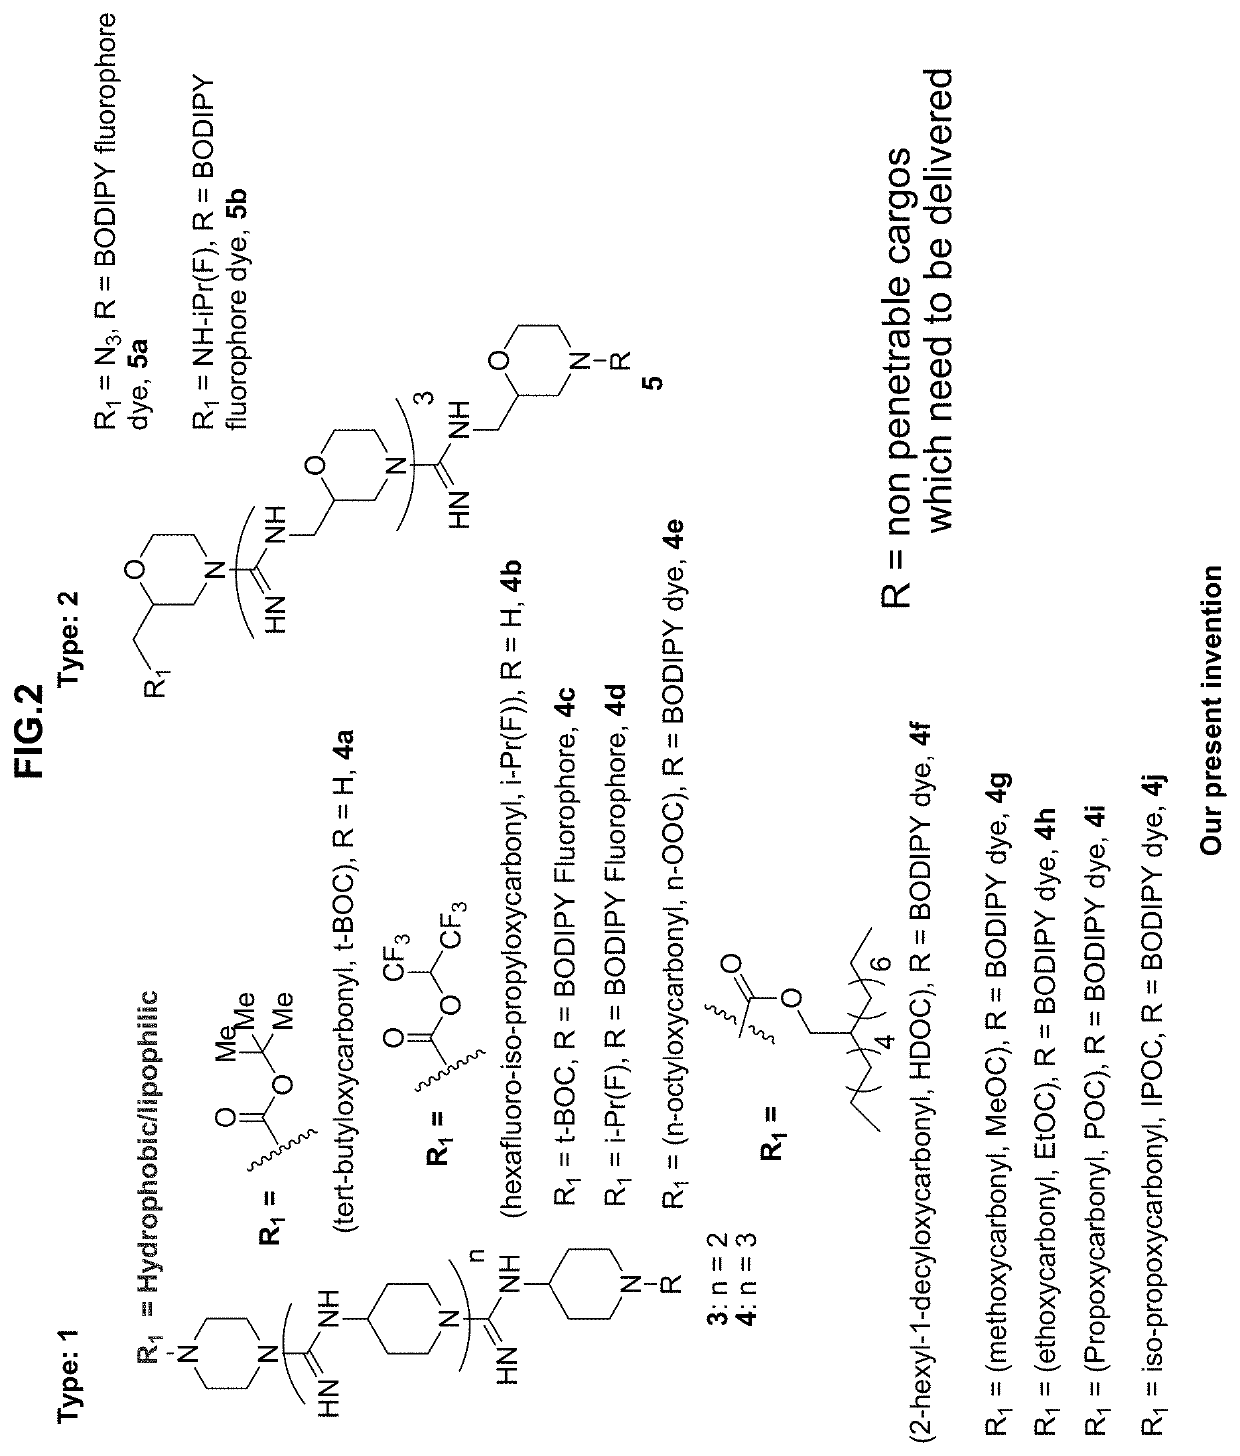 Oligo-guanidines based cellular transporter comprising heterocyclic rings with hydrophobic and/or lipophilic groups at N-terminal for effective delivery of nonpenetrable cargos in-vitro and in-vivo